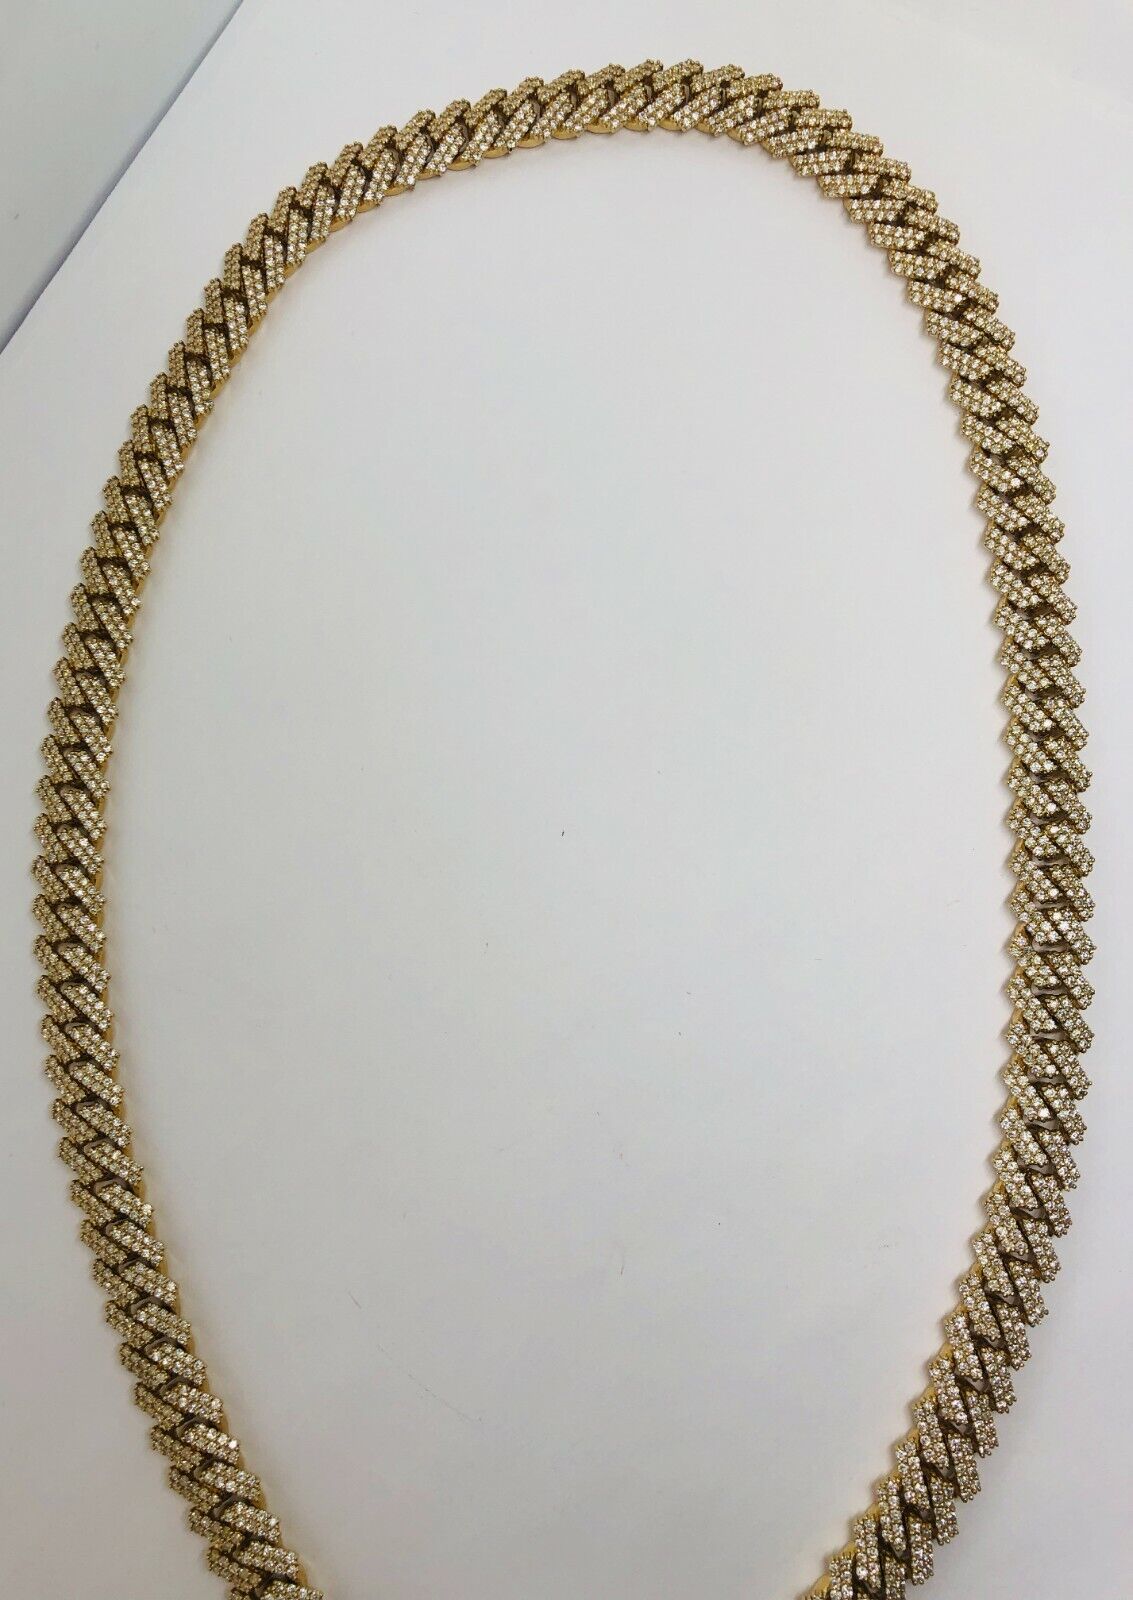 14k Yellow Gold Diamond Curb Link 20ct Necklace 22"